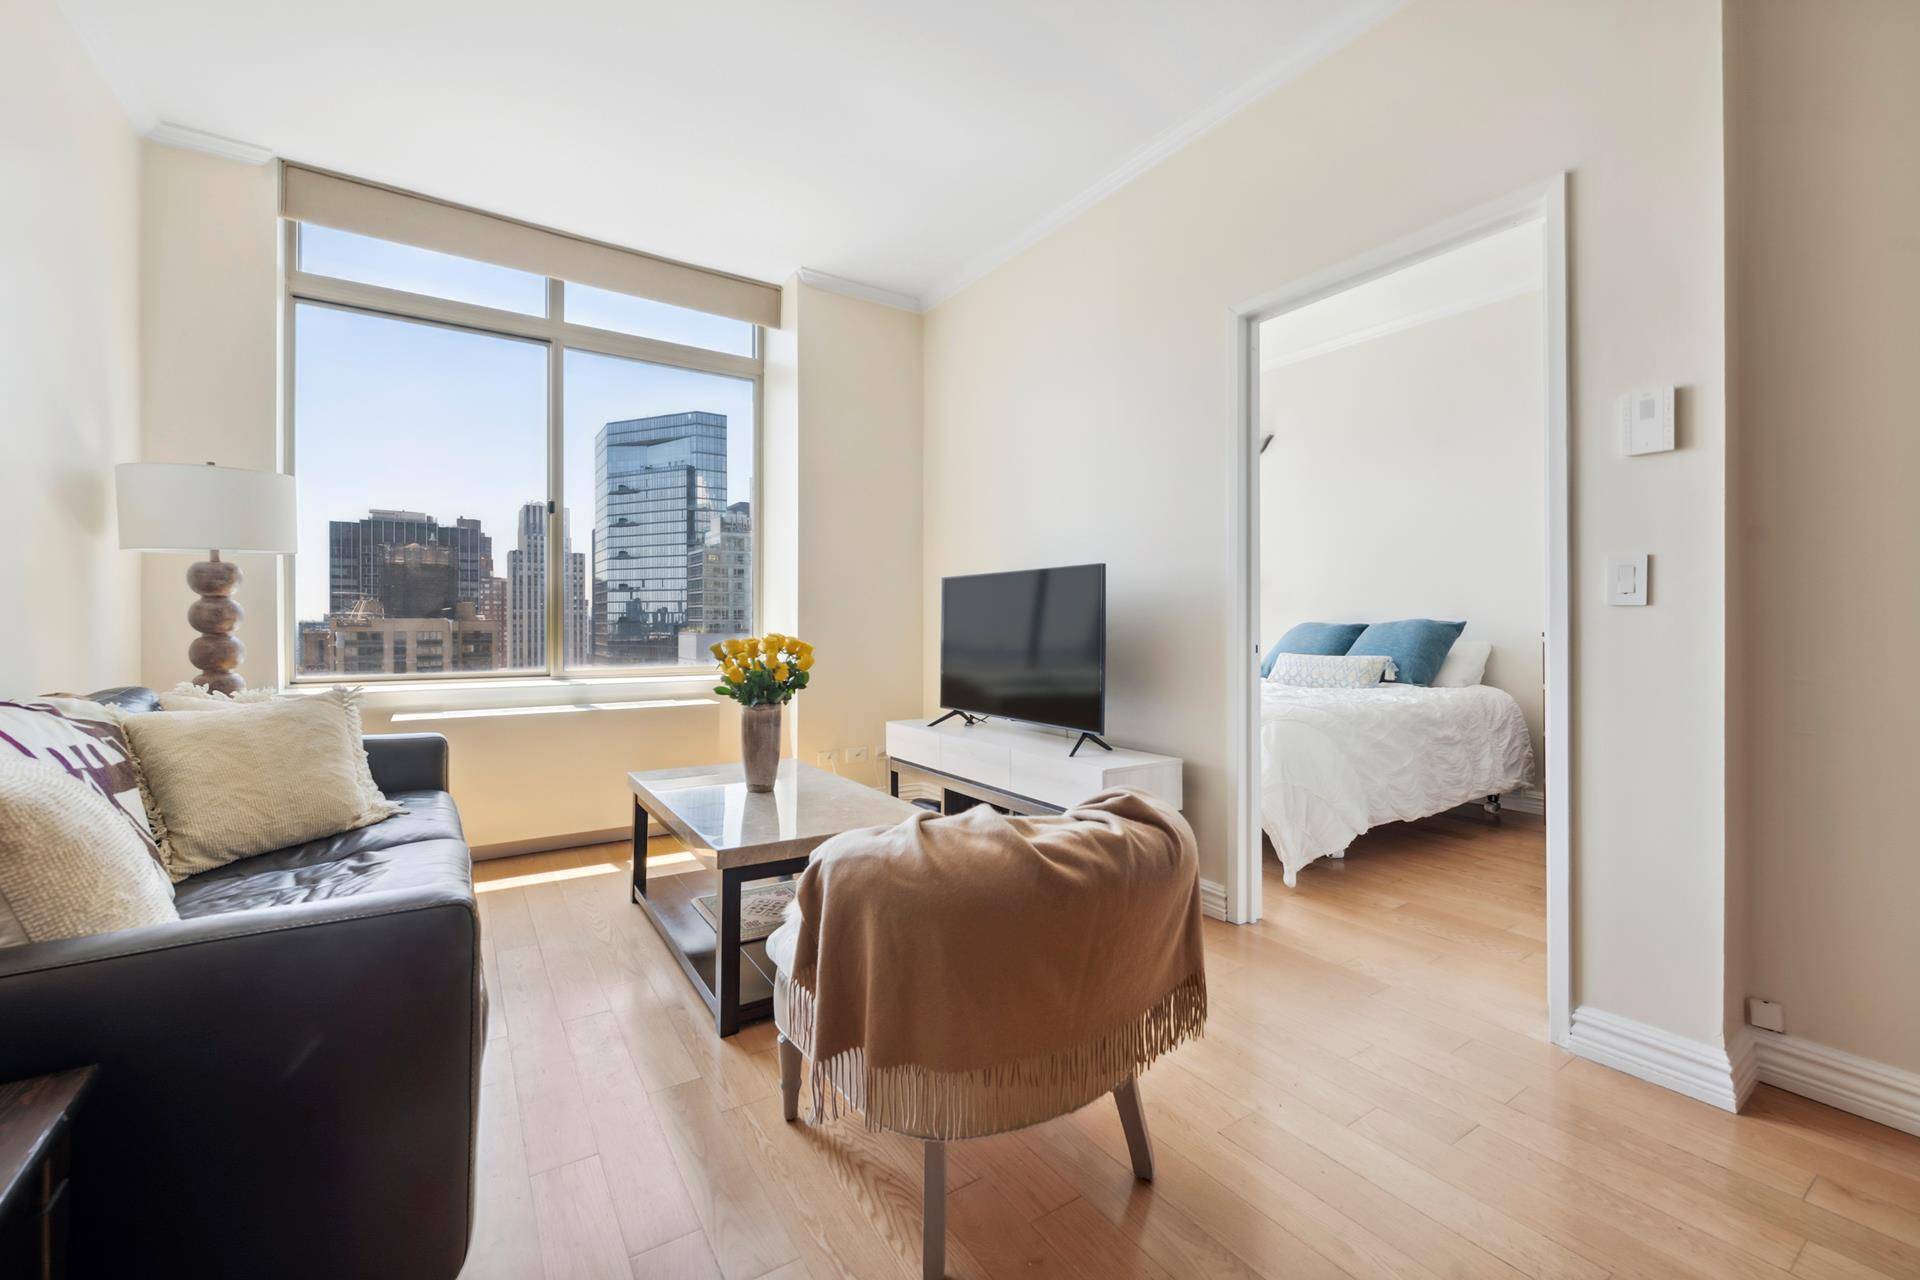 Experience the epitome of Manhattan living in this high ceiling Alcove Studio at 236 East 47th Street, Unit 34A.